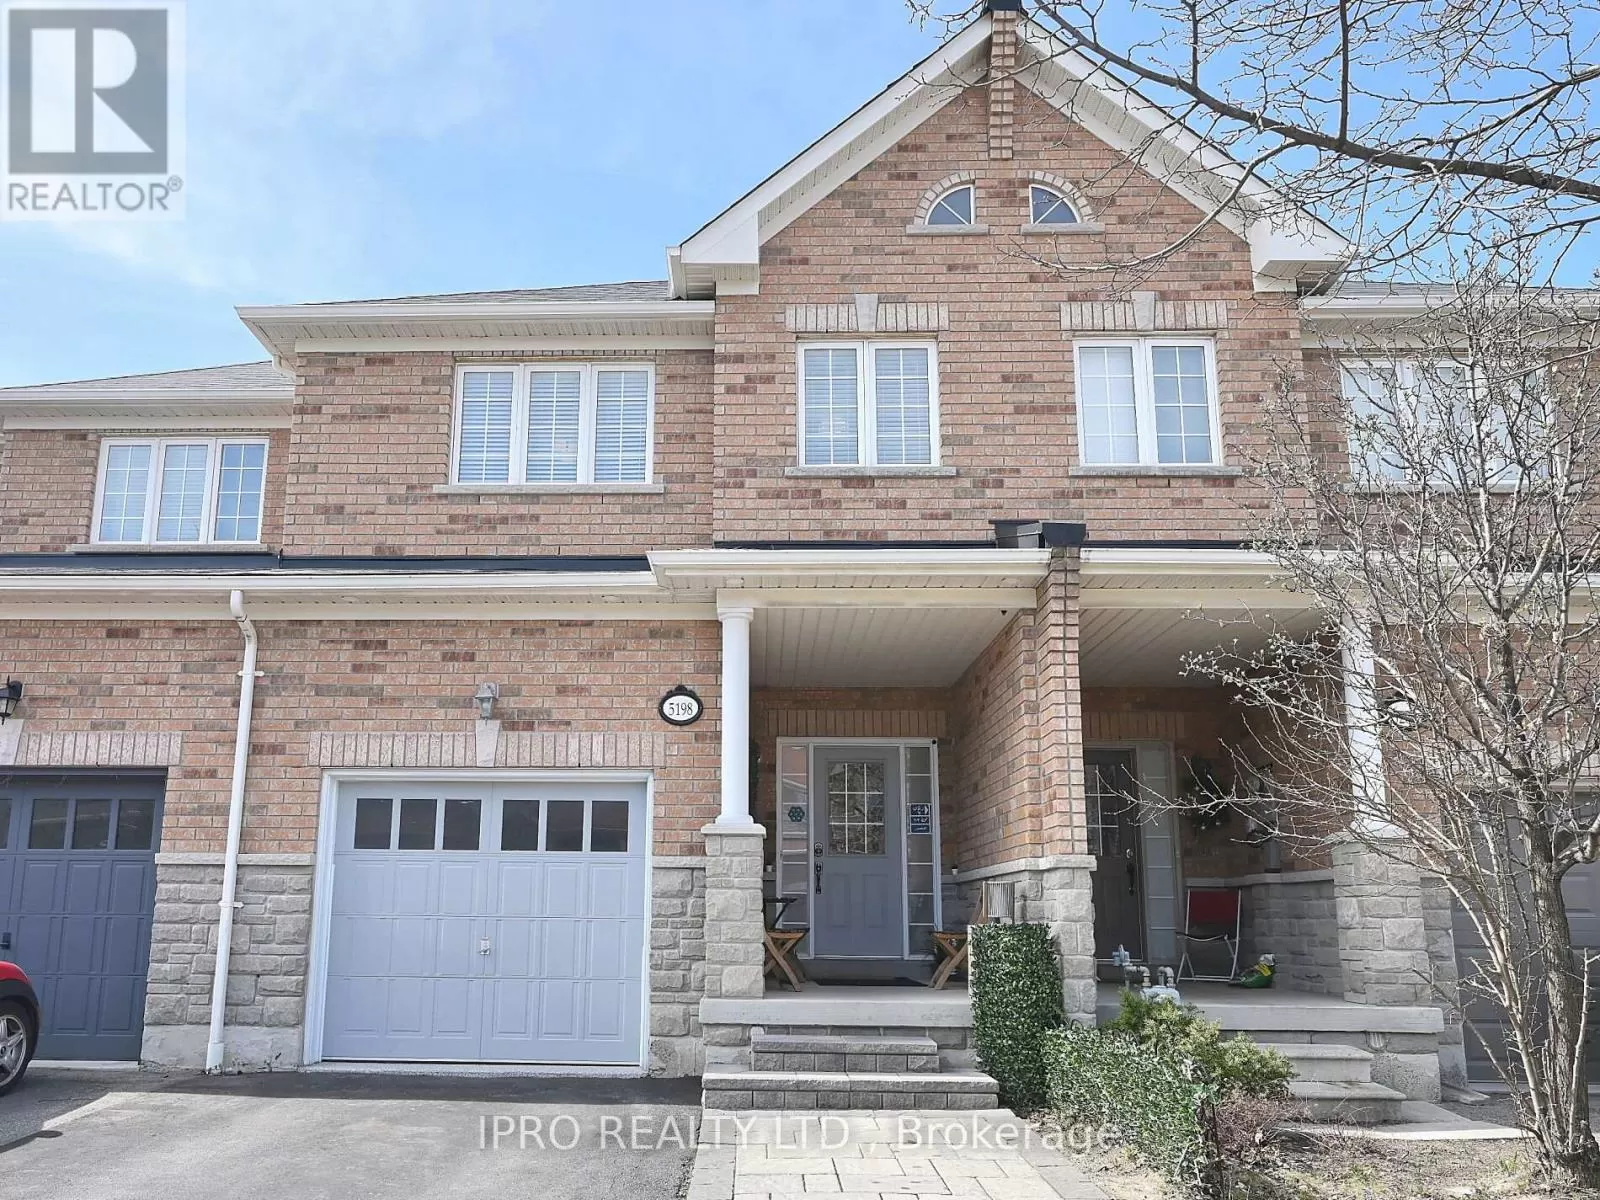 Row / Townhouse for rent: 5198 Angel Stone Dr, Mississauga, Ontario L5M 0L4